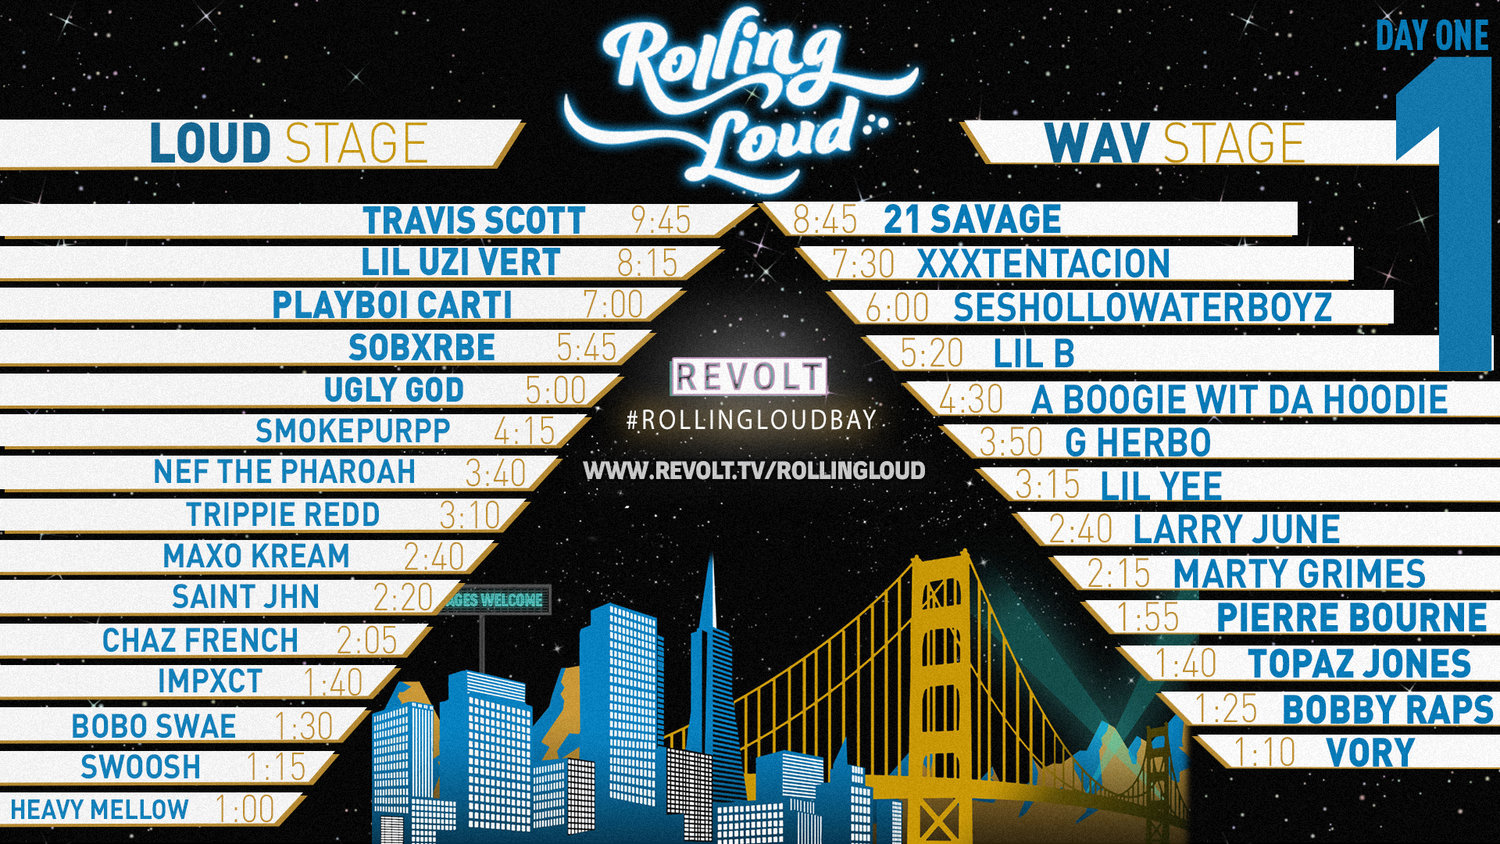 Watch Day 1 Live Stream of Rolling Loud Bay Area Festival HipHopNMore